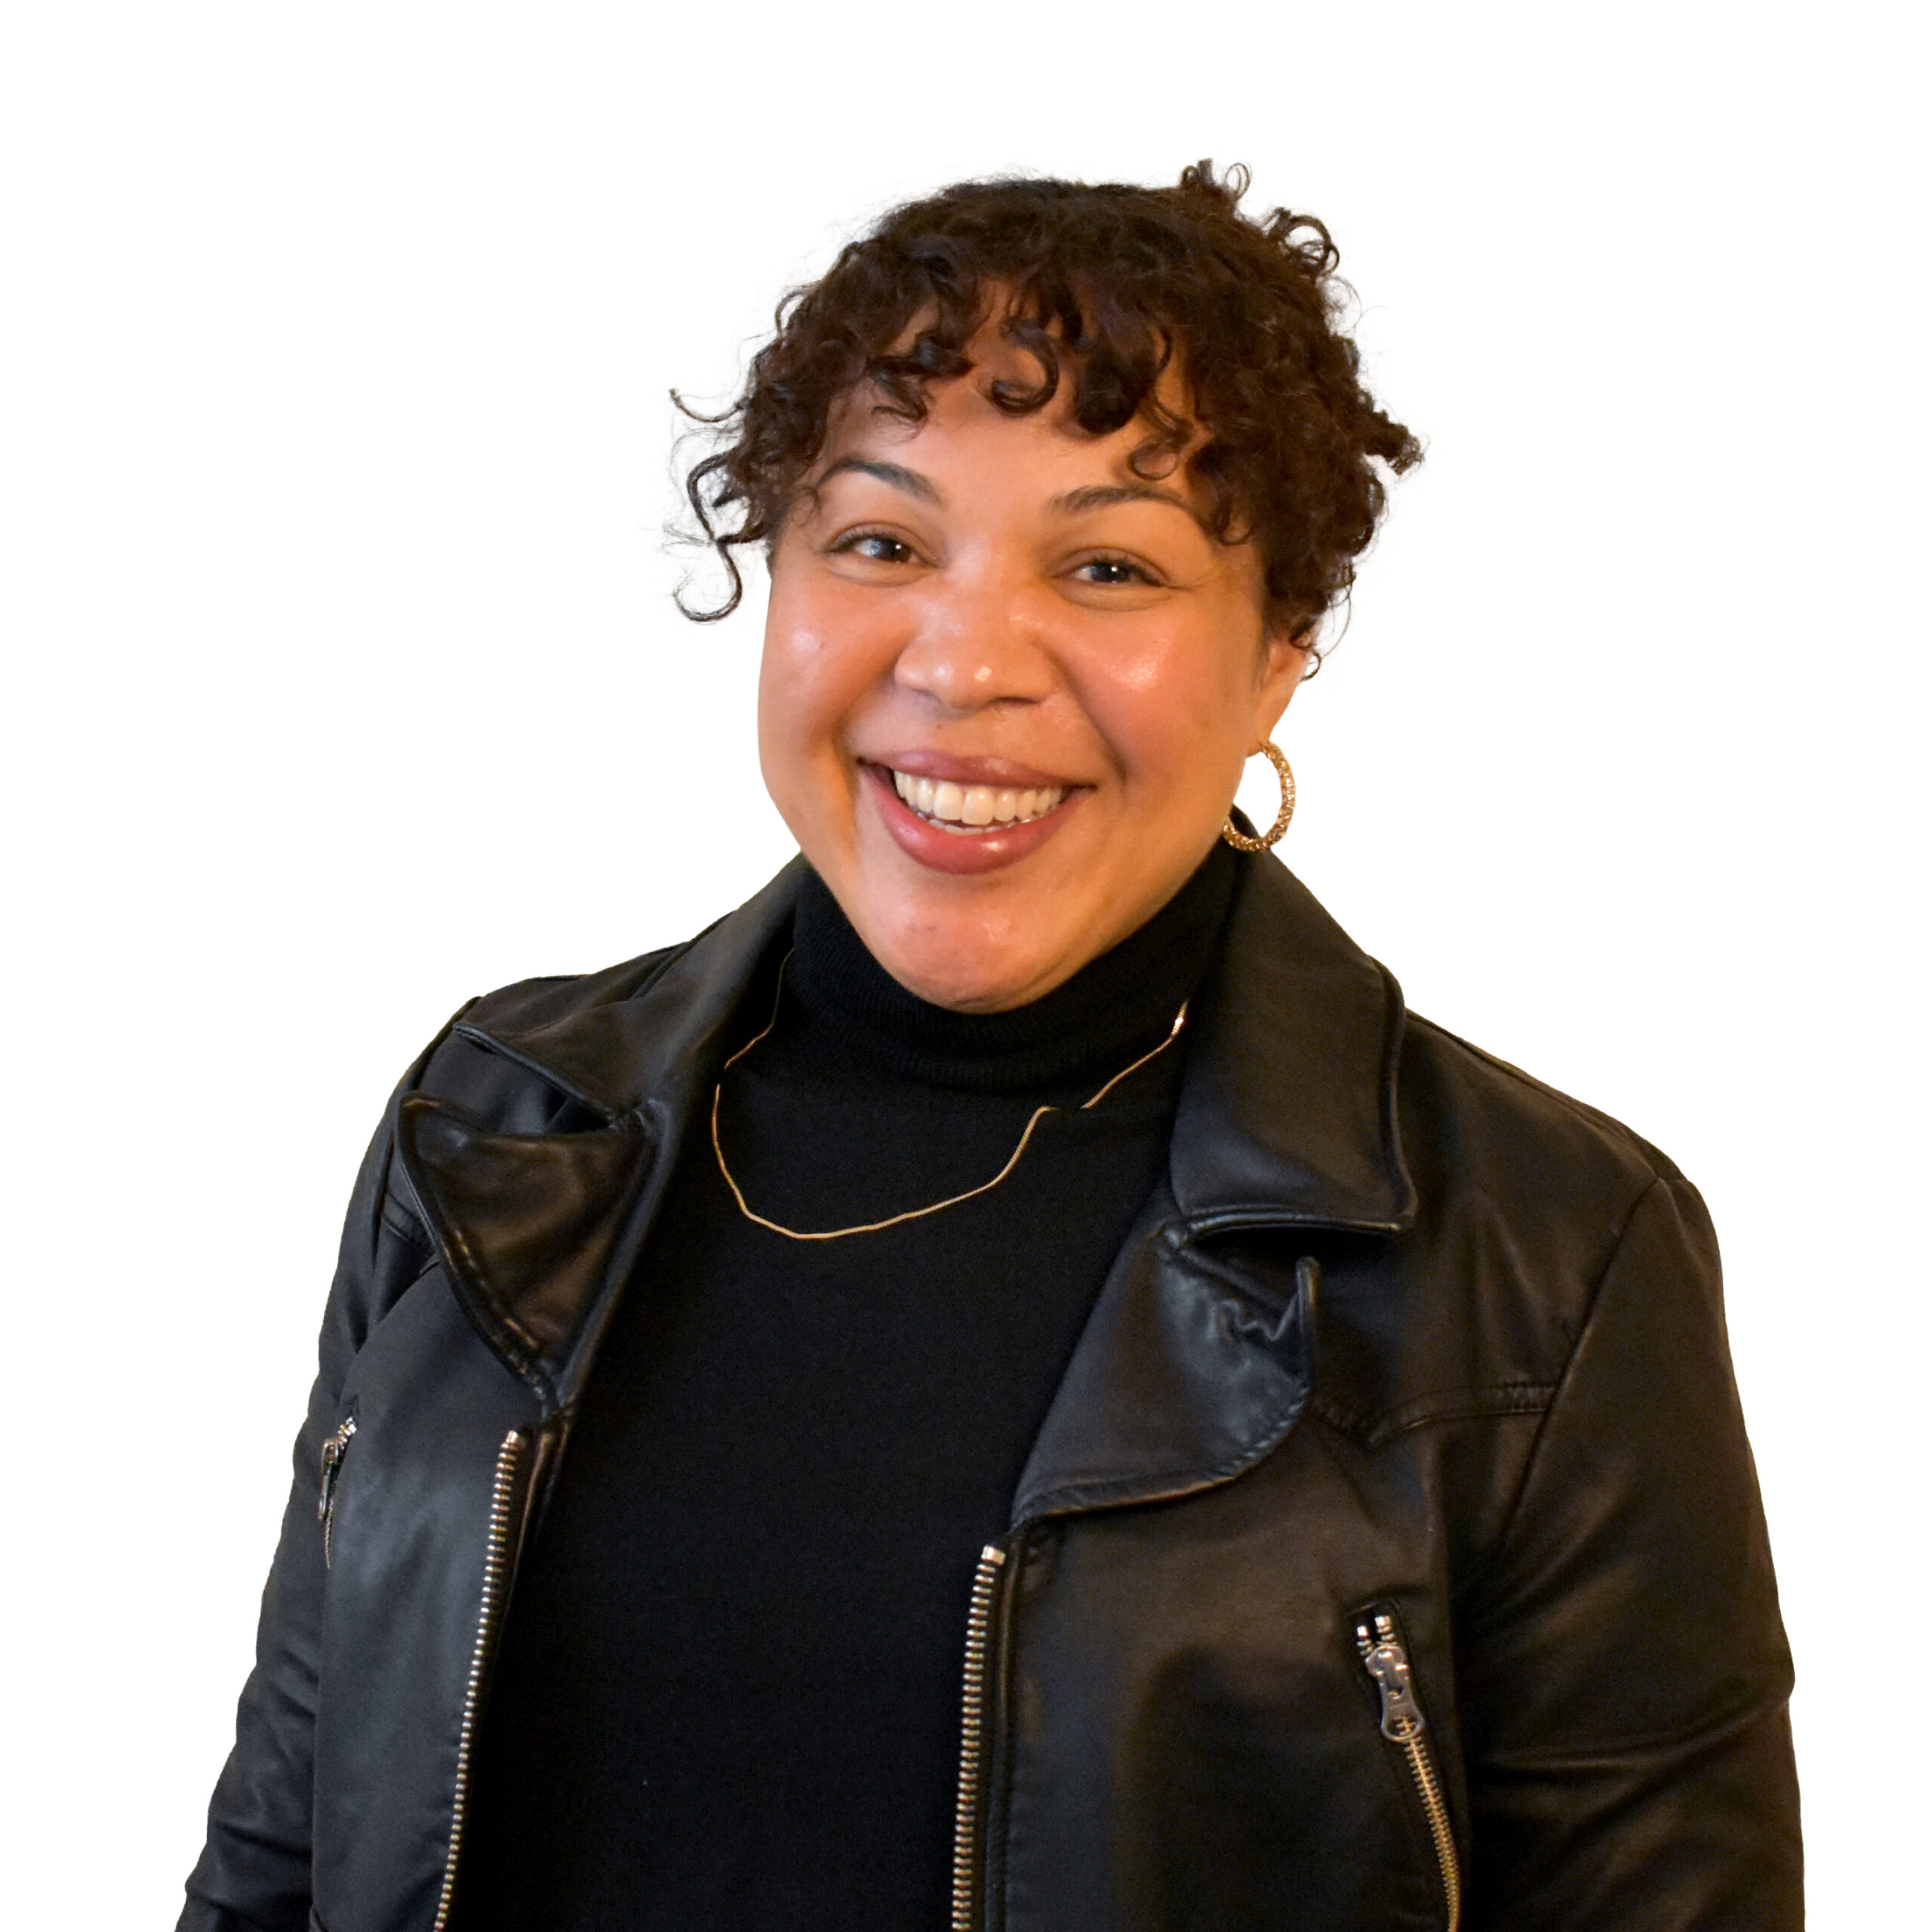 Liz Ott, a Black woman laughing with curly brown hair tied up wearing black turtleneck and (vegan) leather jacket.